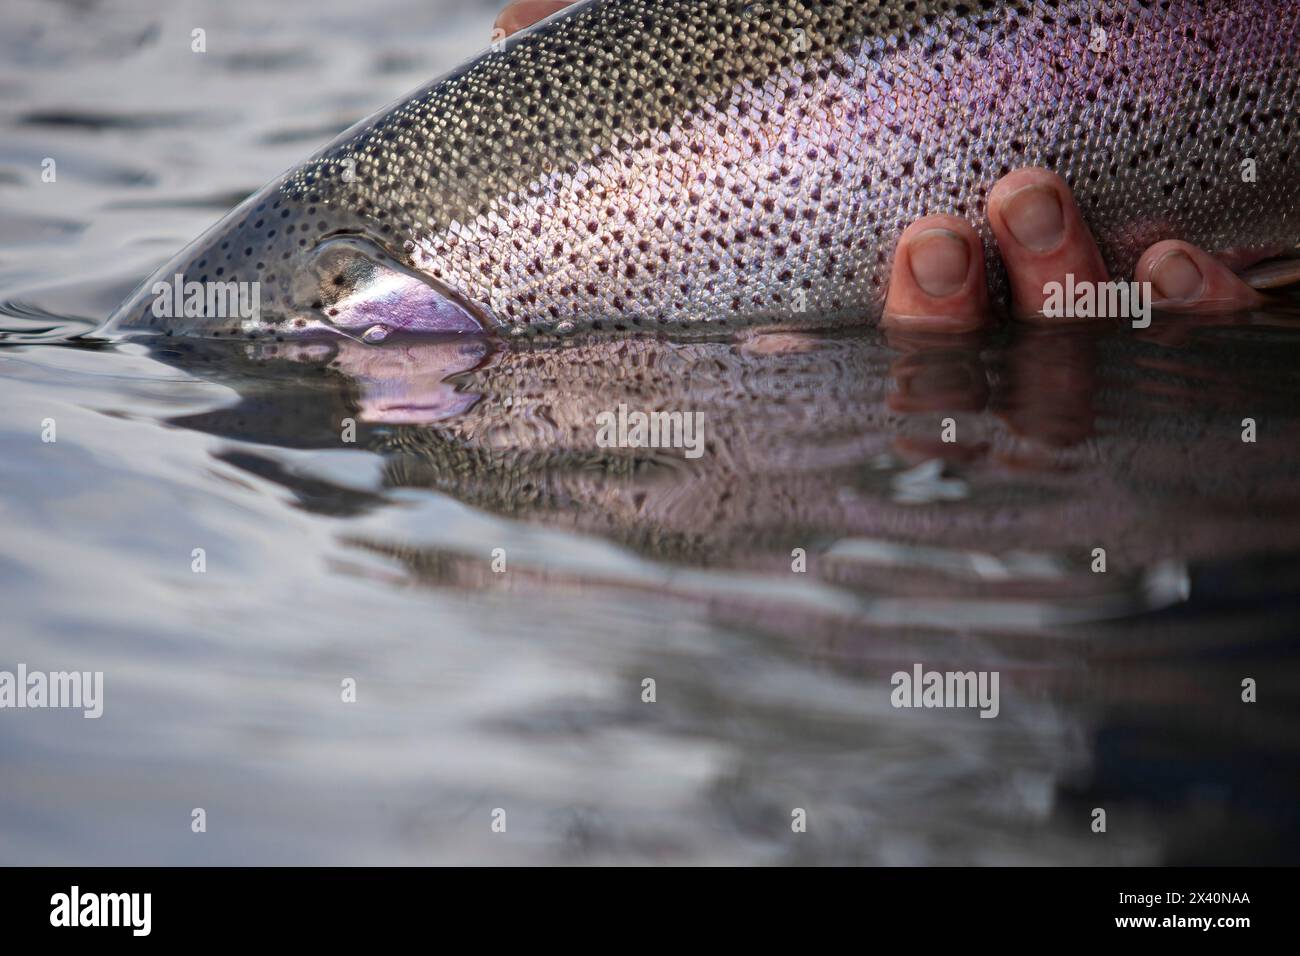 Native Rainbow trout (Oncorhynchus mykiss) caught by a fly fisherman in Alaska's famous Kenai River, is released back into the river Stock Photo